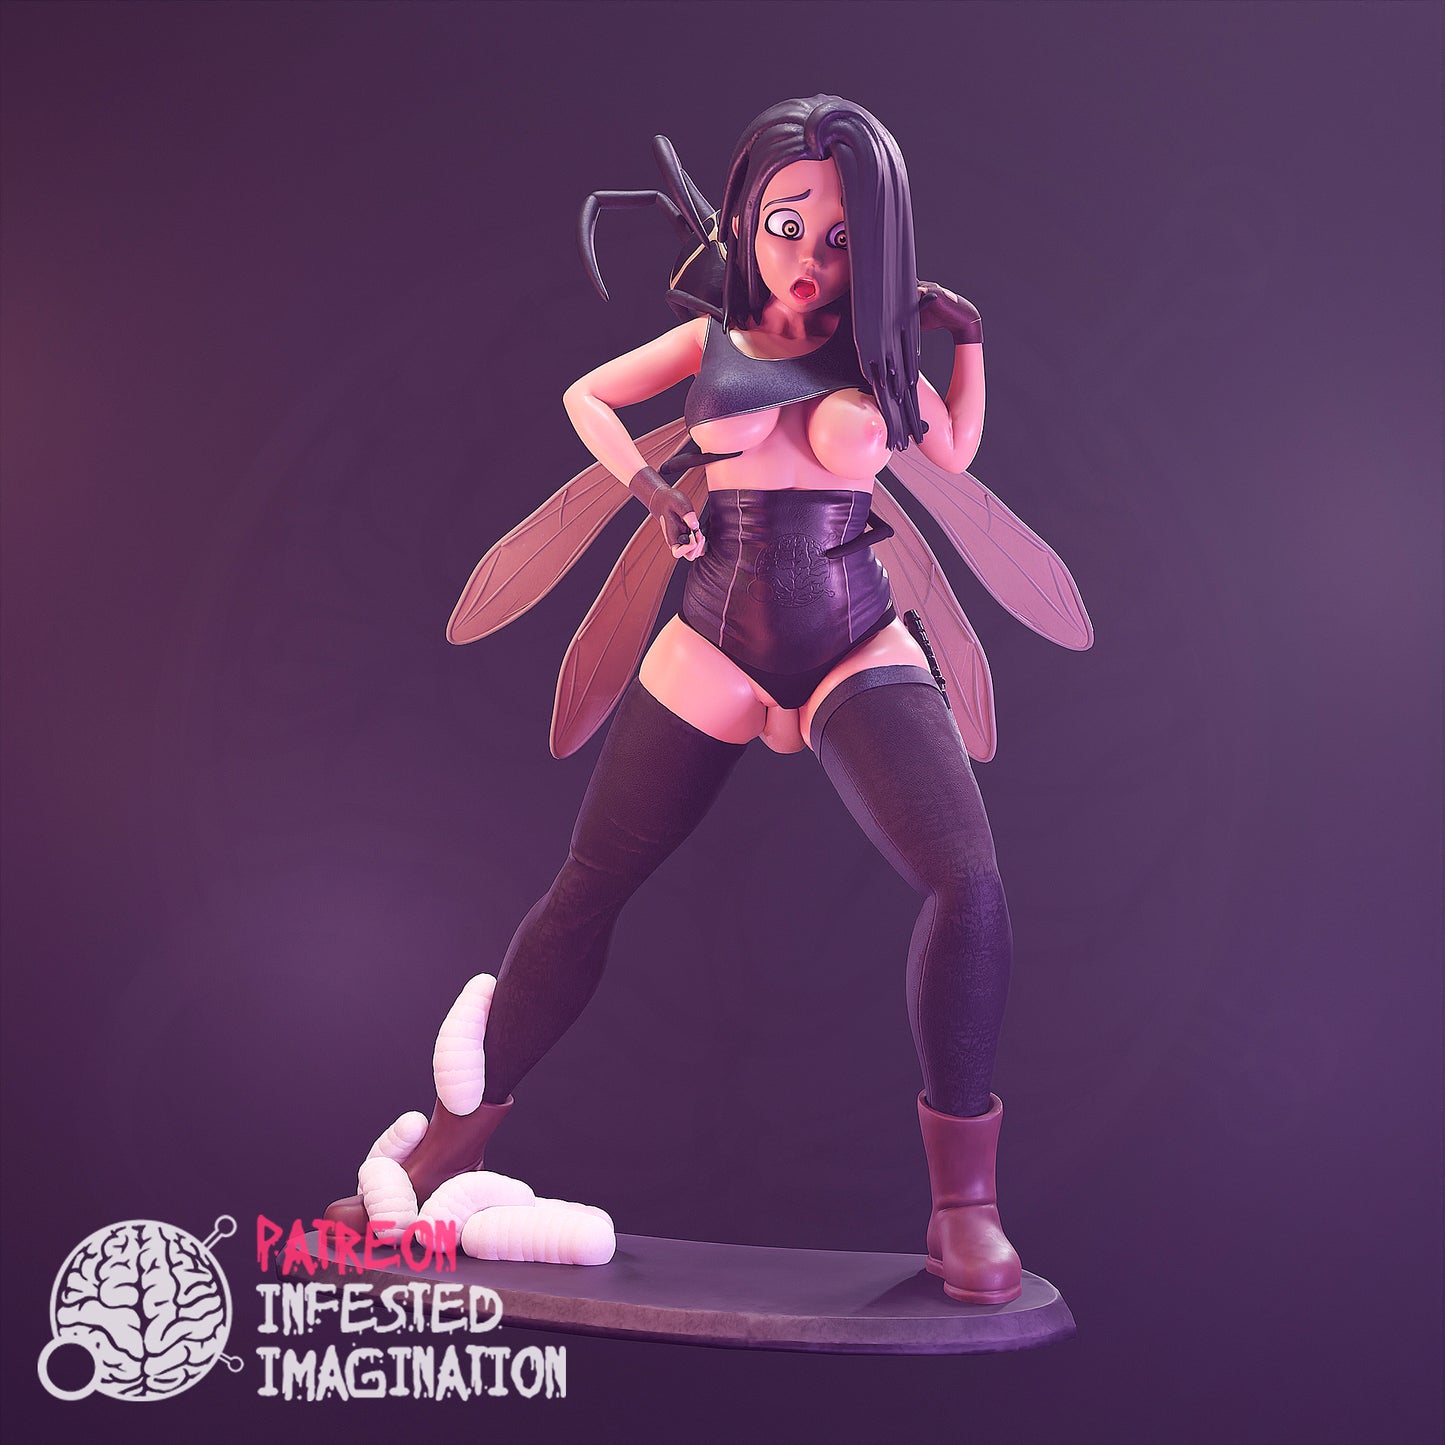 WASP IMPREGNATION HENTAI PRINTABLE SCULPTURE - Infested Imagination